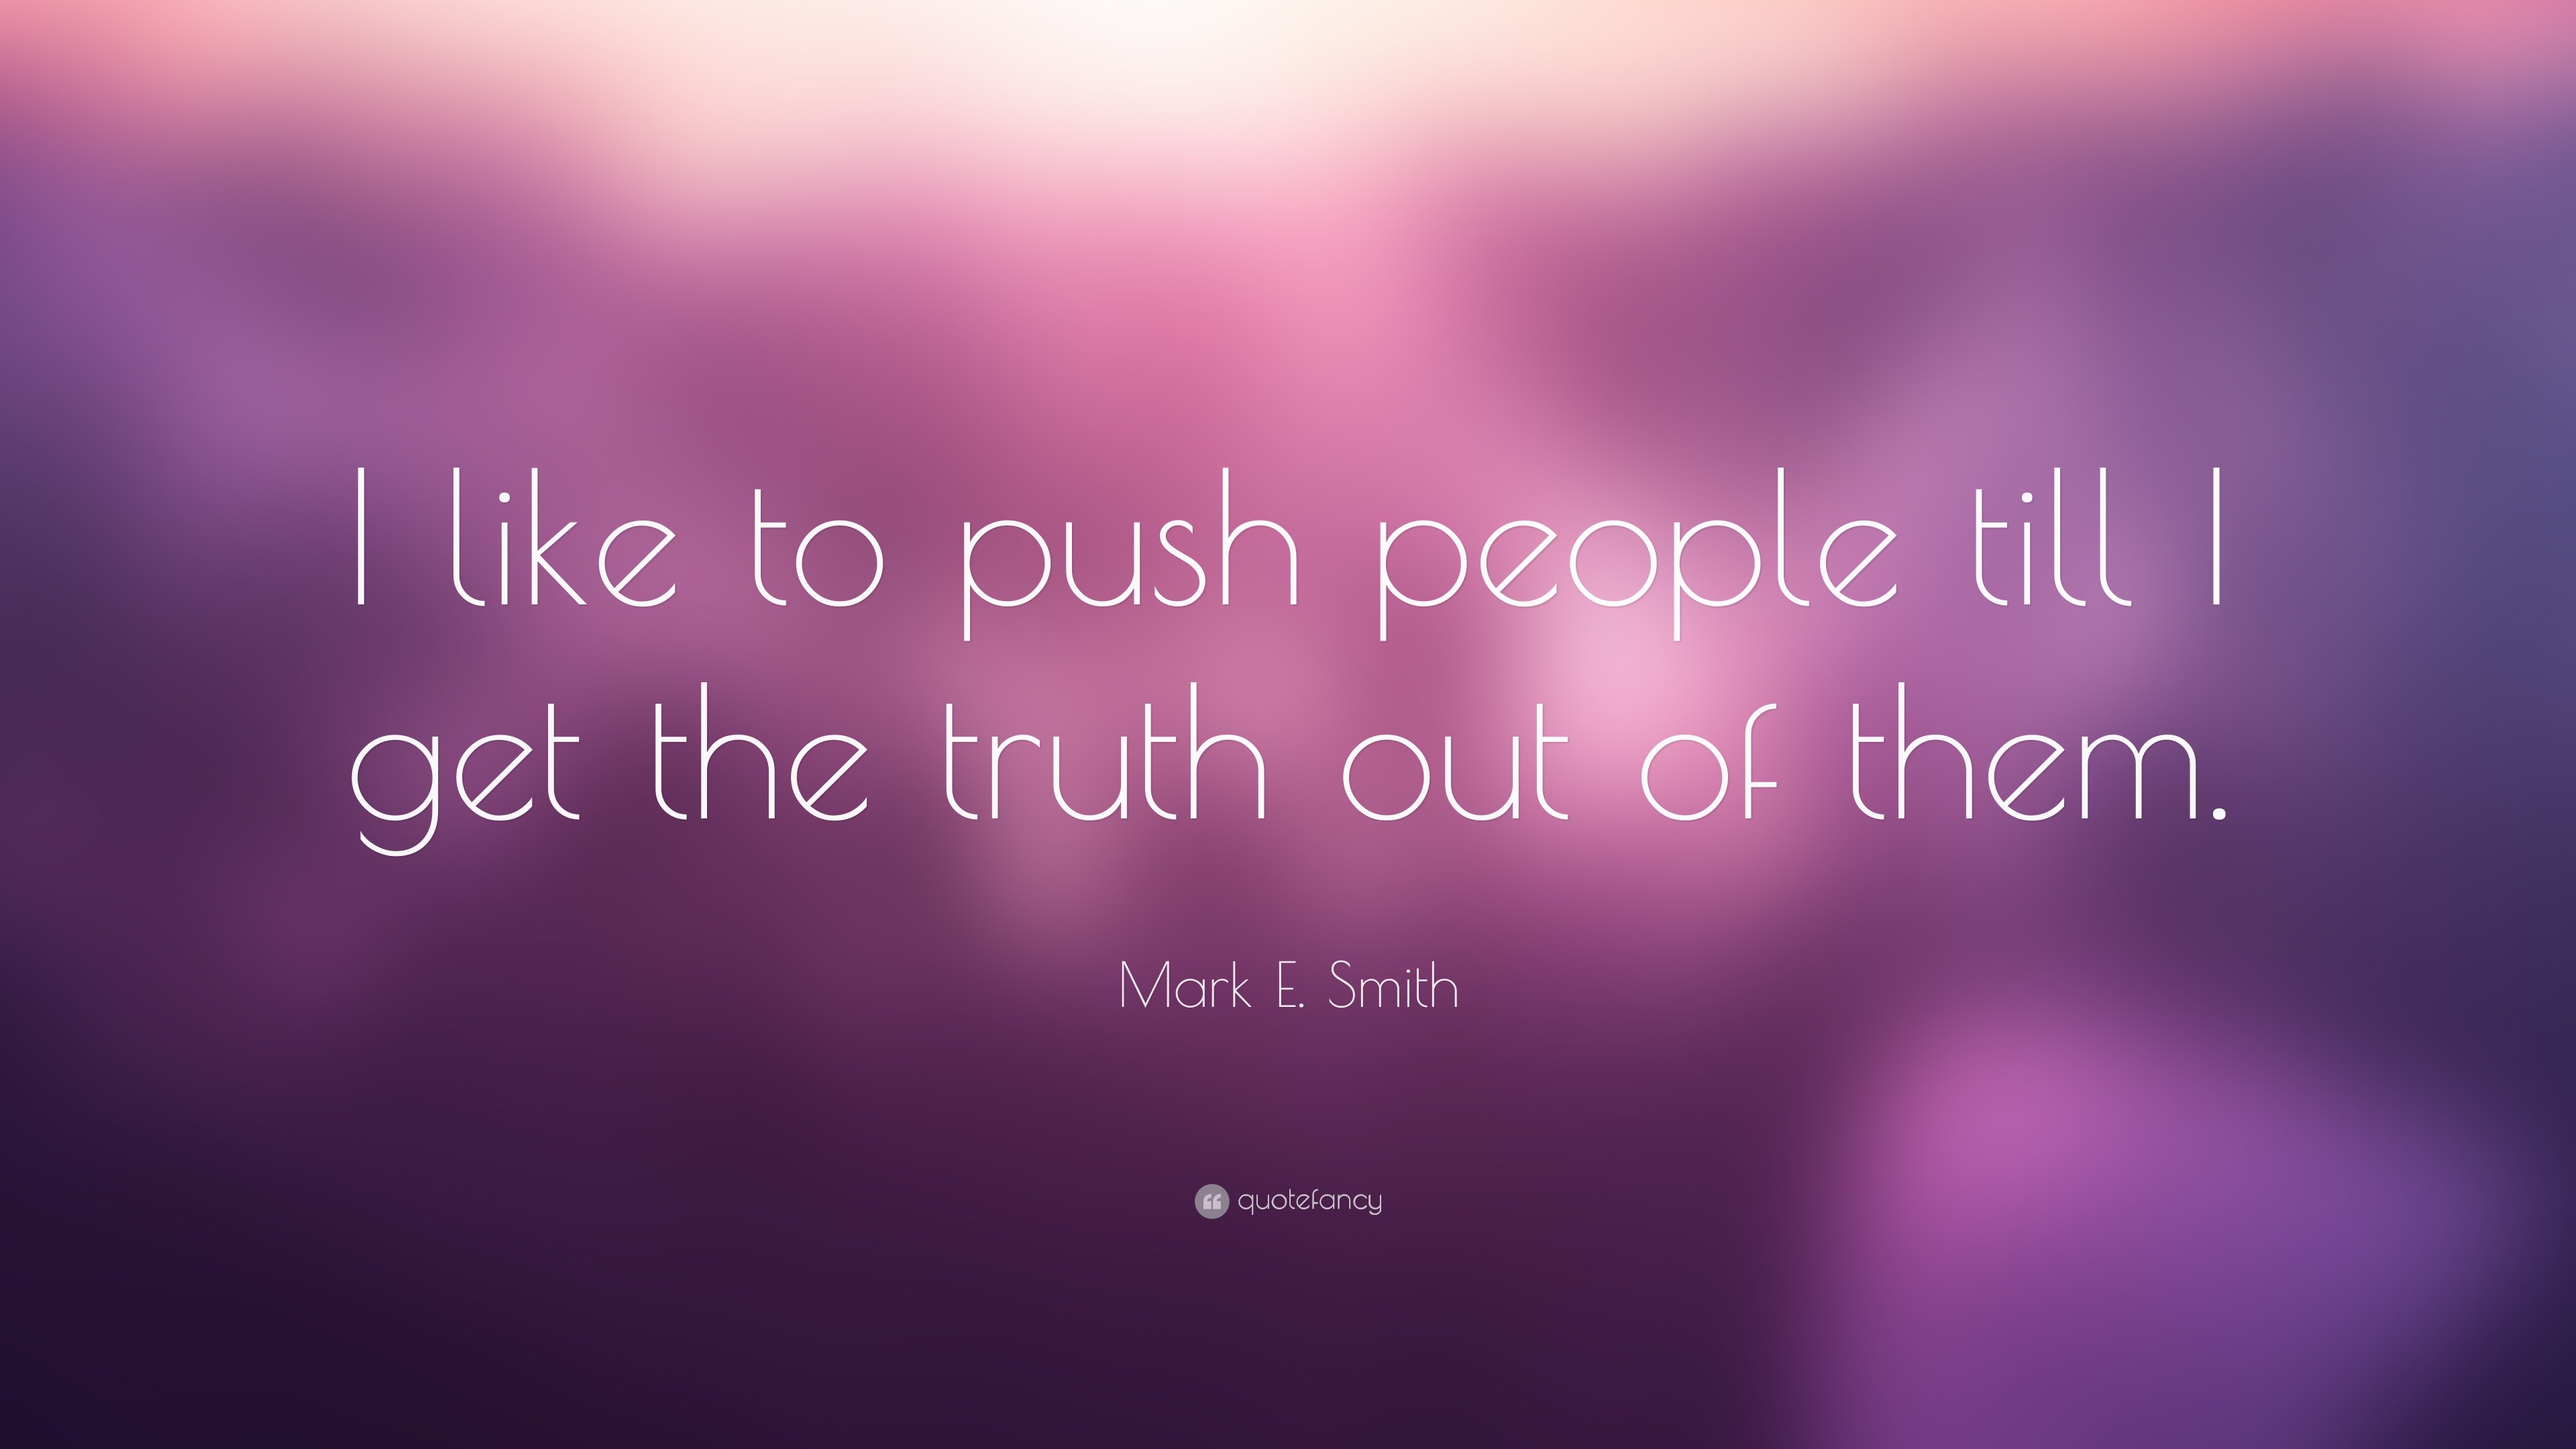 https://quotefancy.com/media/wallpaper/3840x2160/1447243-Mark-E-Smith-Quote-I-like-to-push-people-till-I-get-the-truth-out.jpg